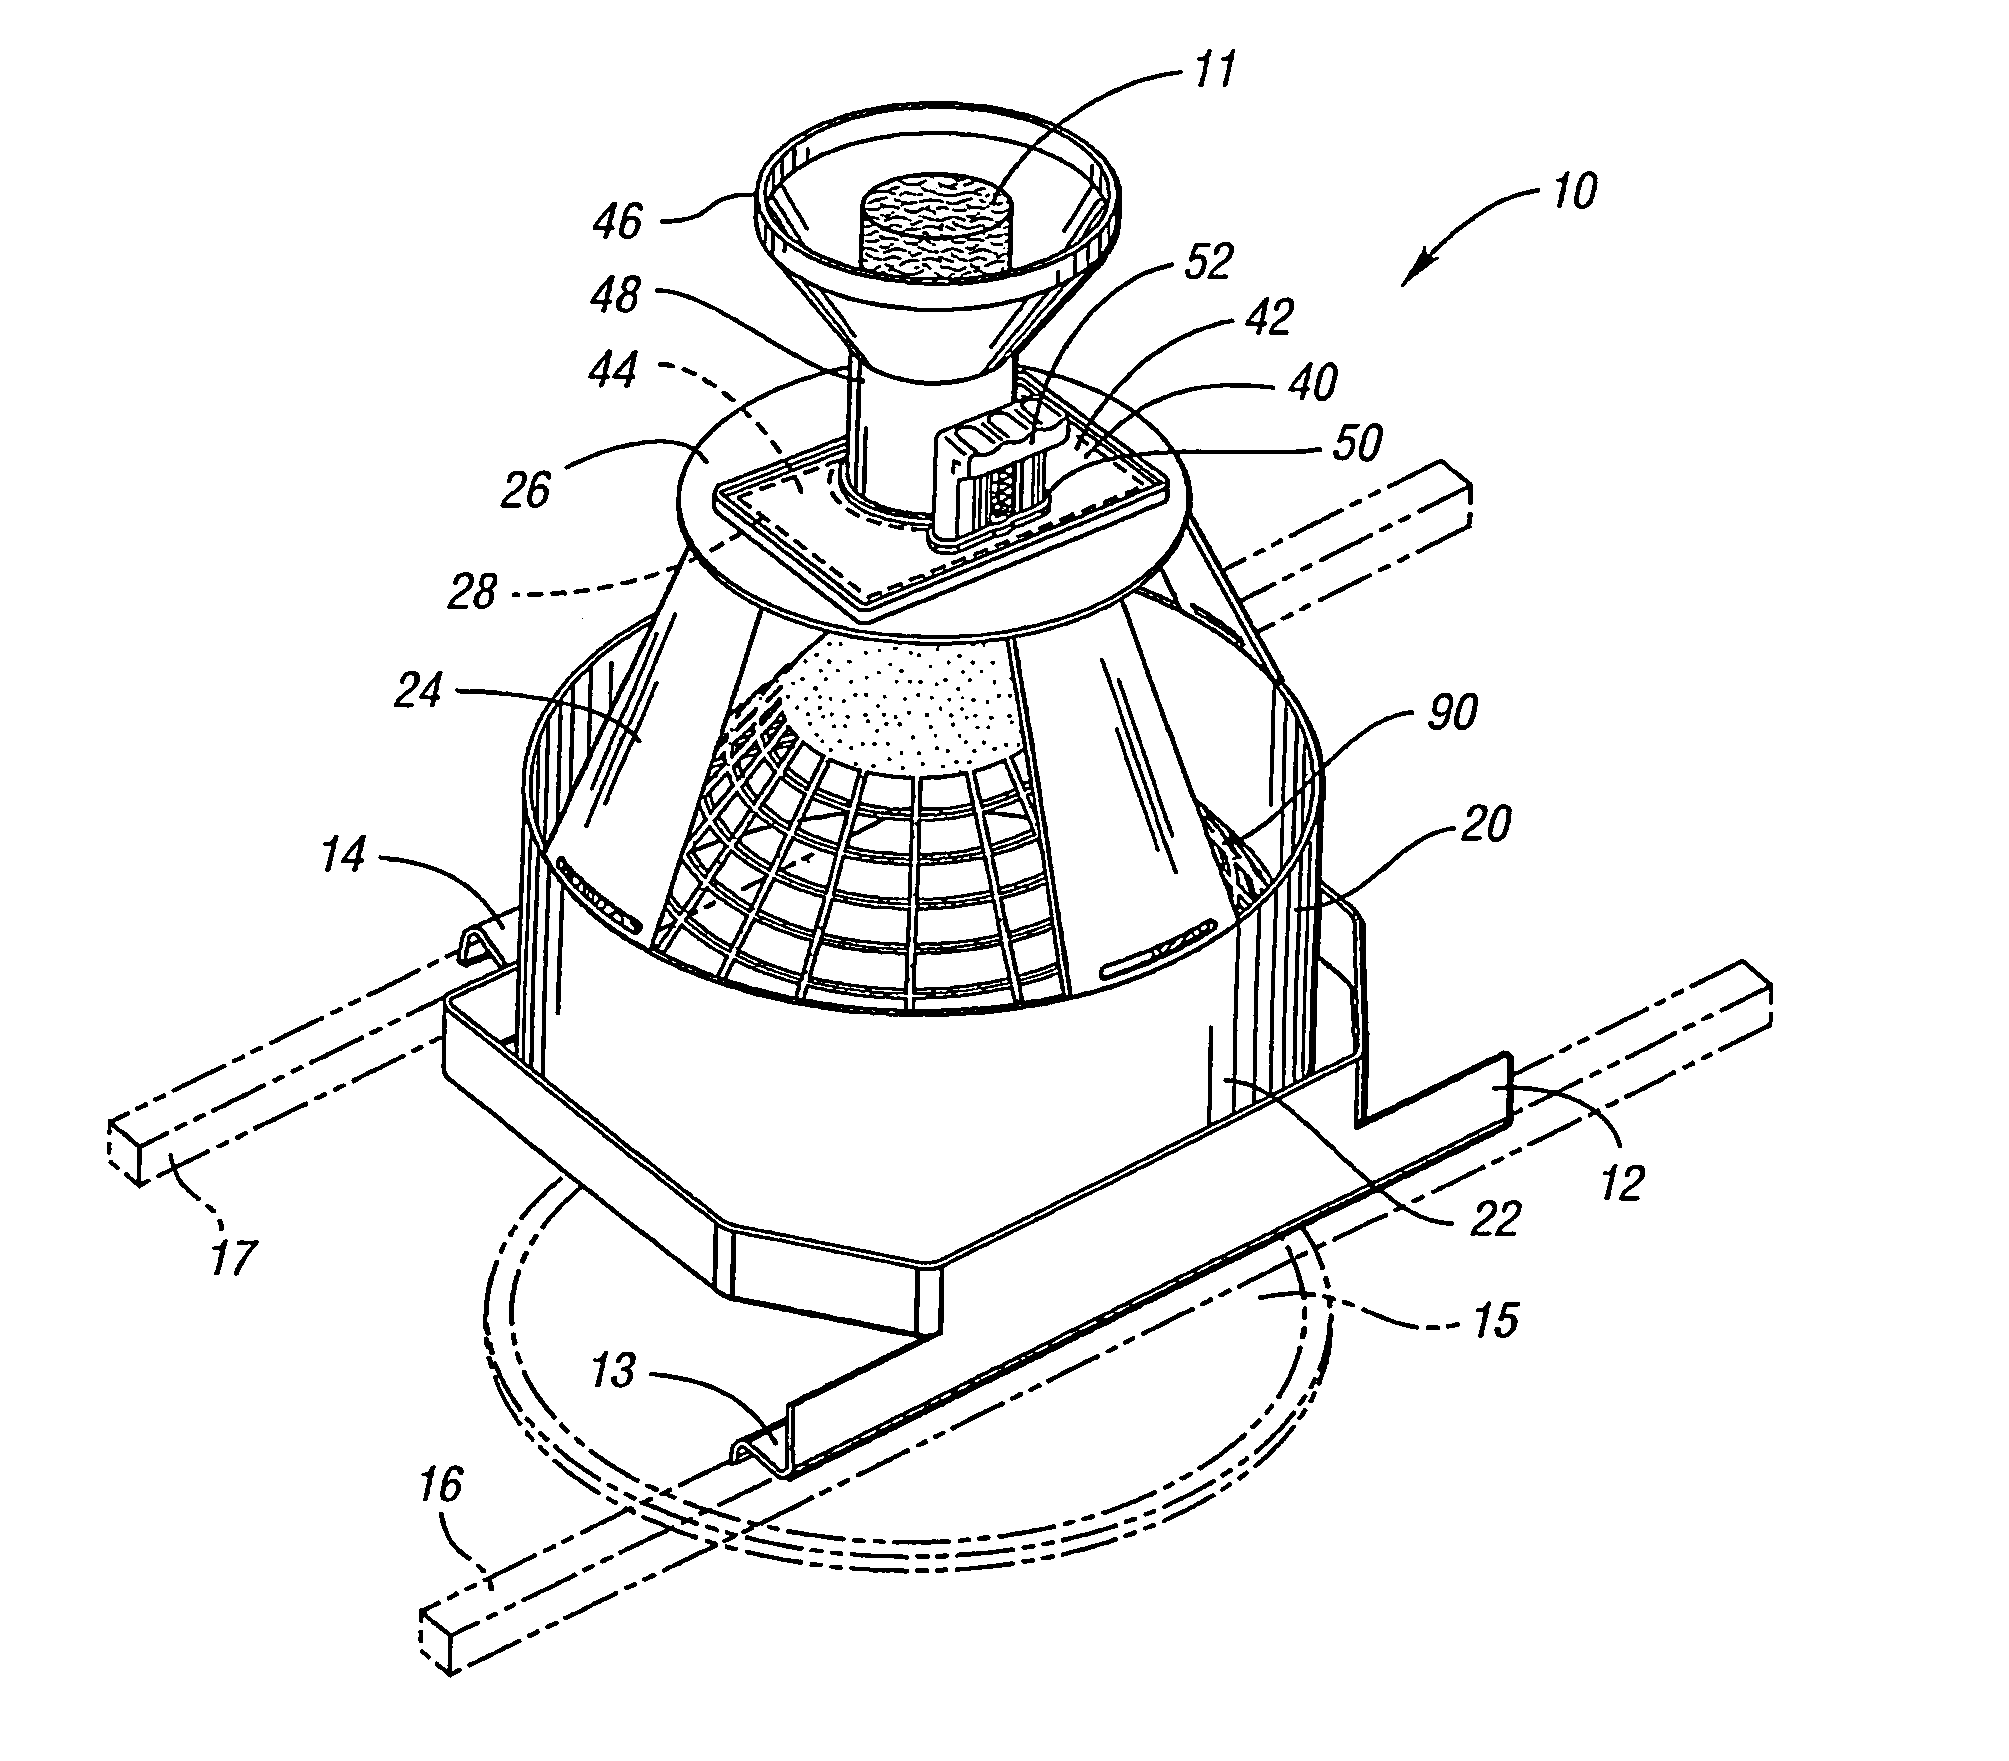 Dischargeable storage device for distributing food over a surface